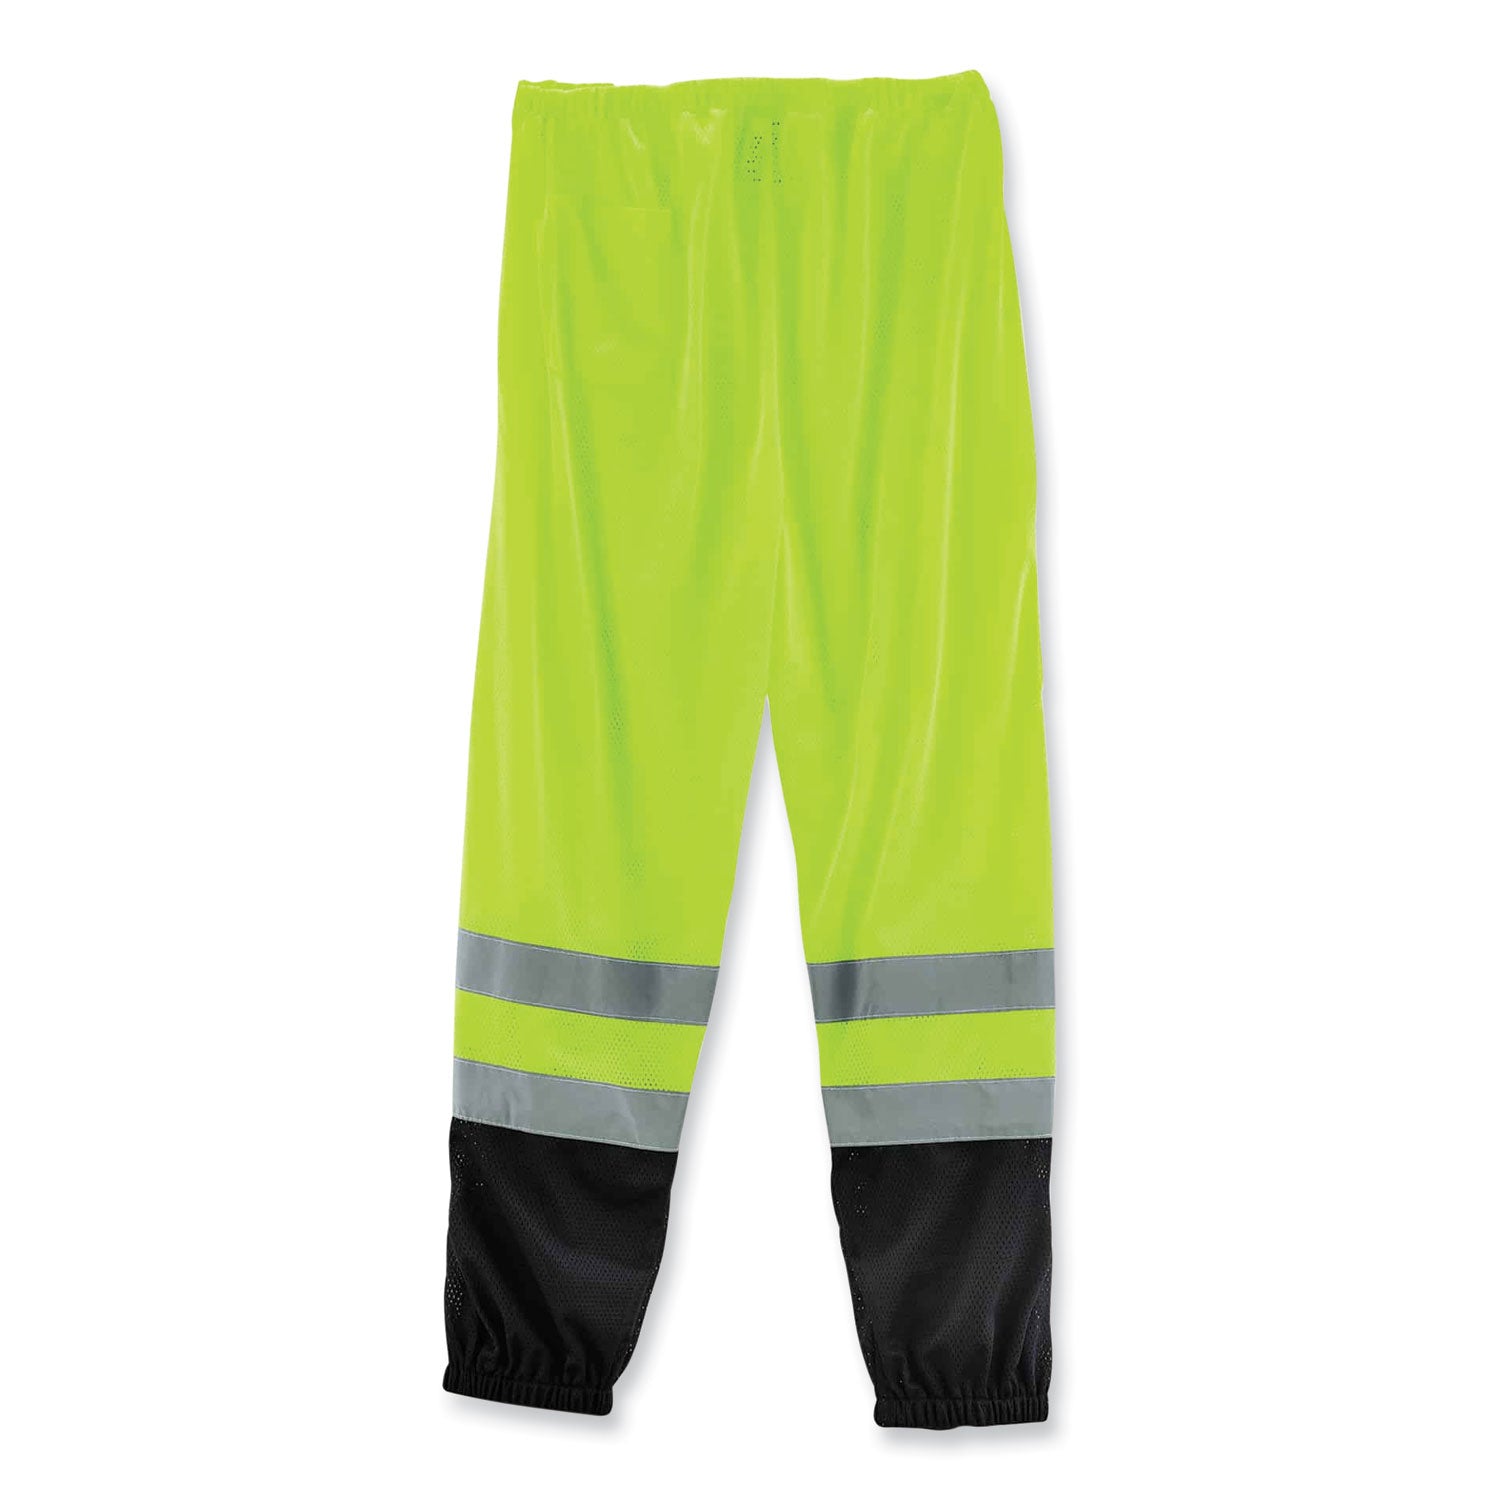 glowear-8910bk-class-e-hi-vis-pants-with-black-bottom-polyester-4x-large-5x-large-lime-ships-in-1-3-business-days_ego23959 - 2